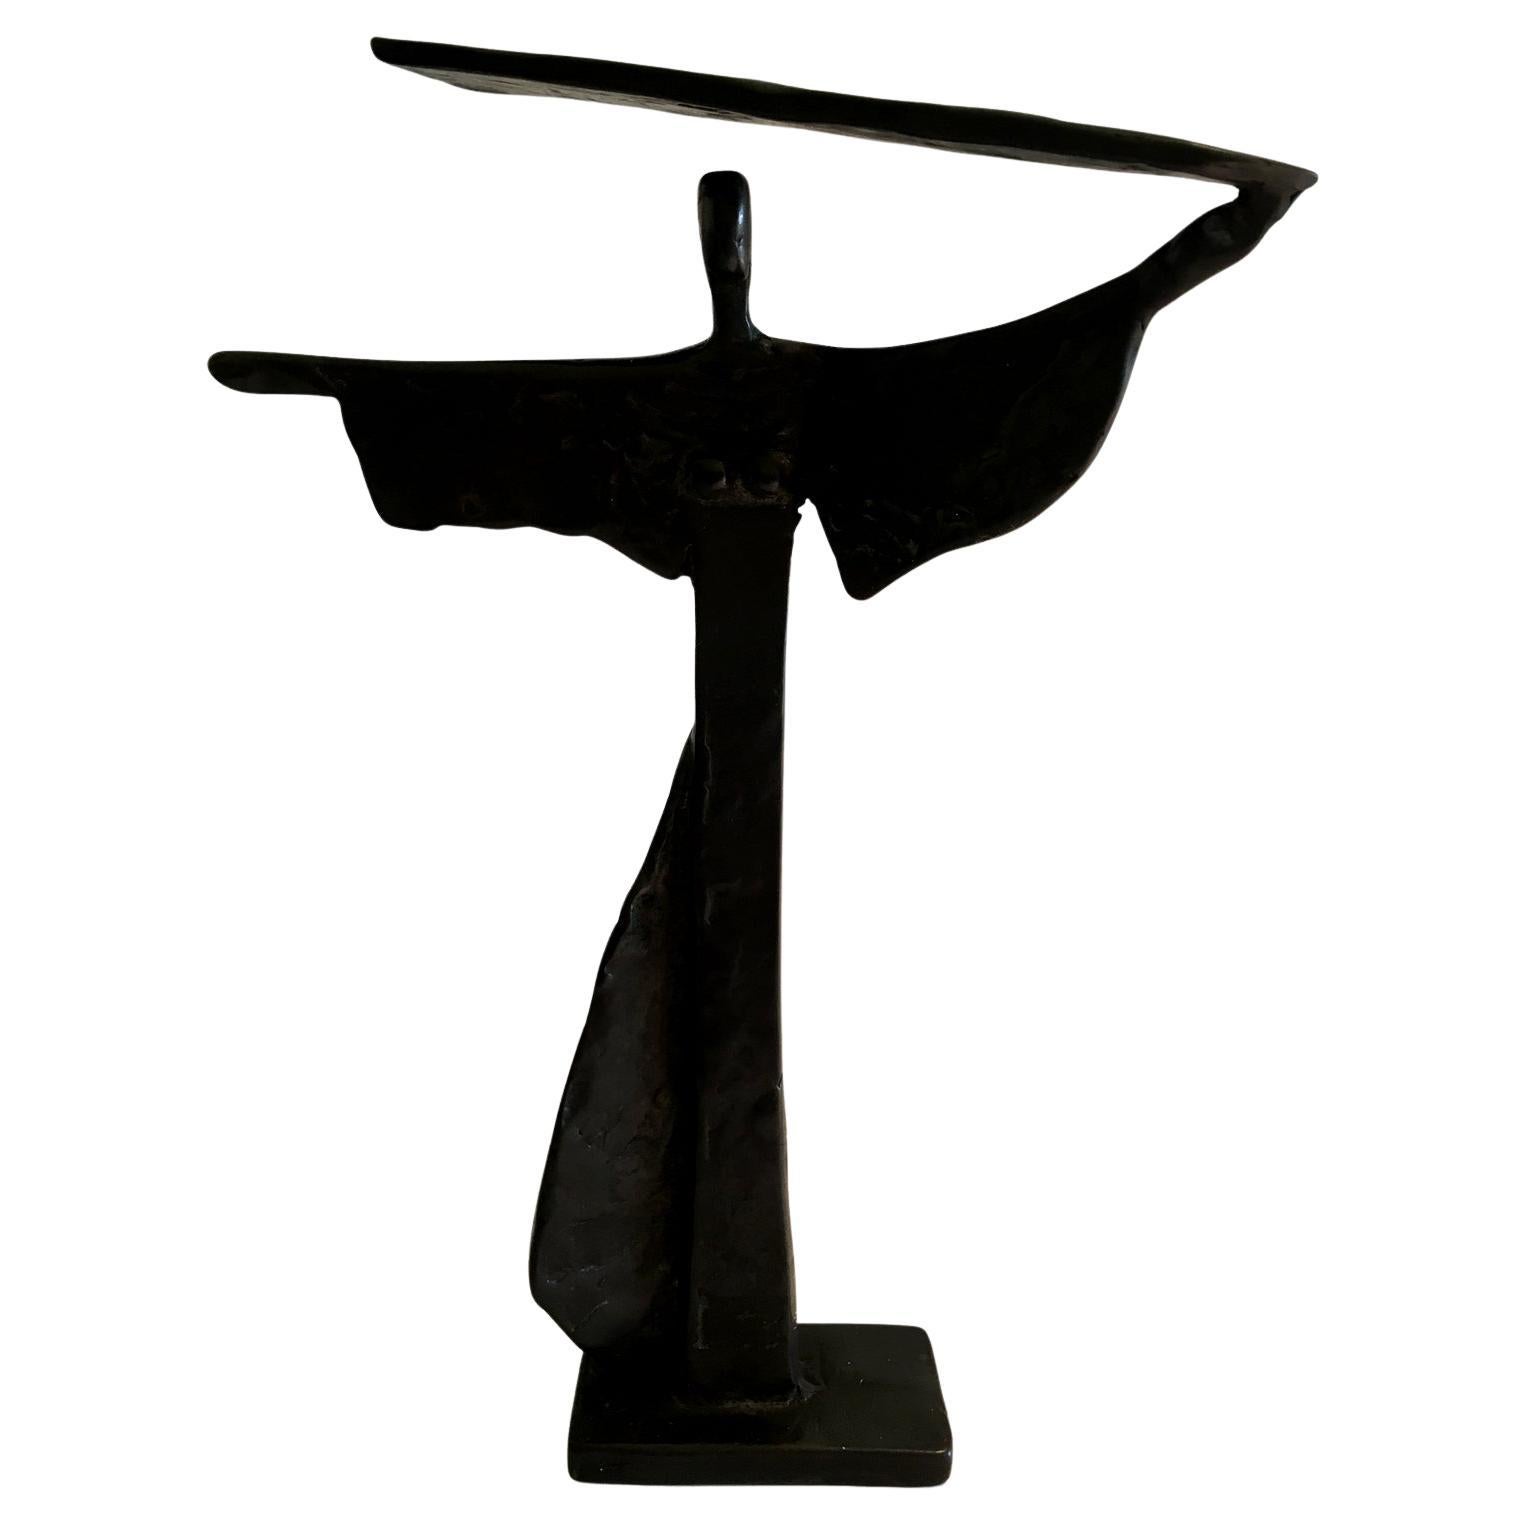 This is a joyful bronze sculpture multiple art work signed by the well known in Italy and abroad, artist Ugo Carà. Title The Dancer

This is a multiple of a numbered edition of 1.000 pieces. The pieces were made in 1980 but they can be considered